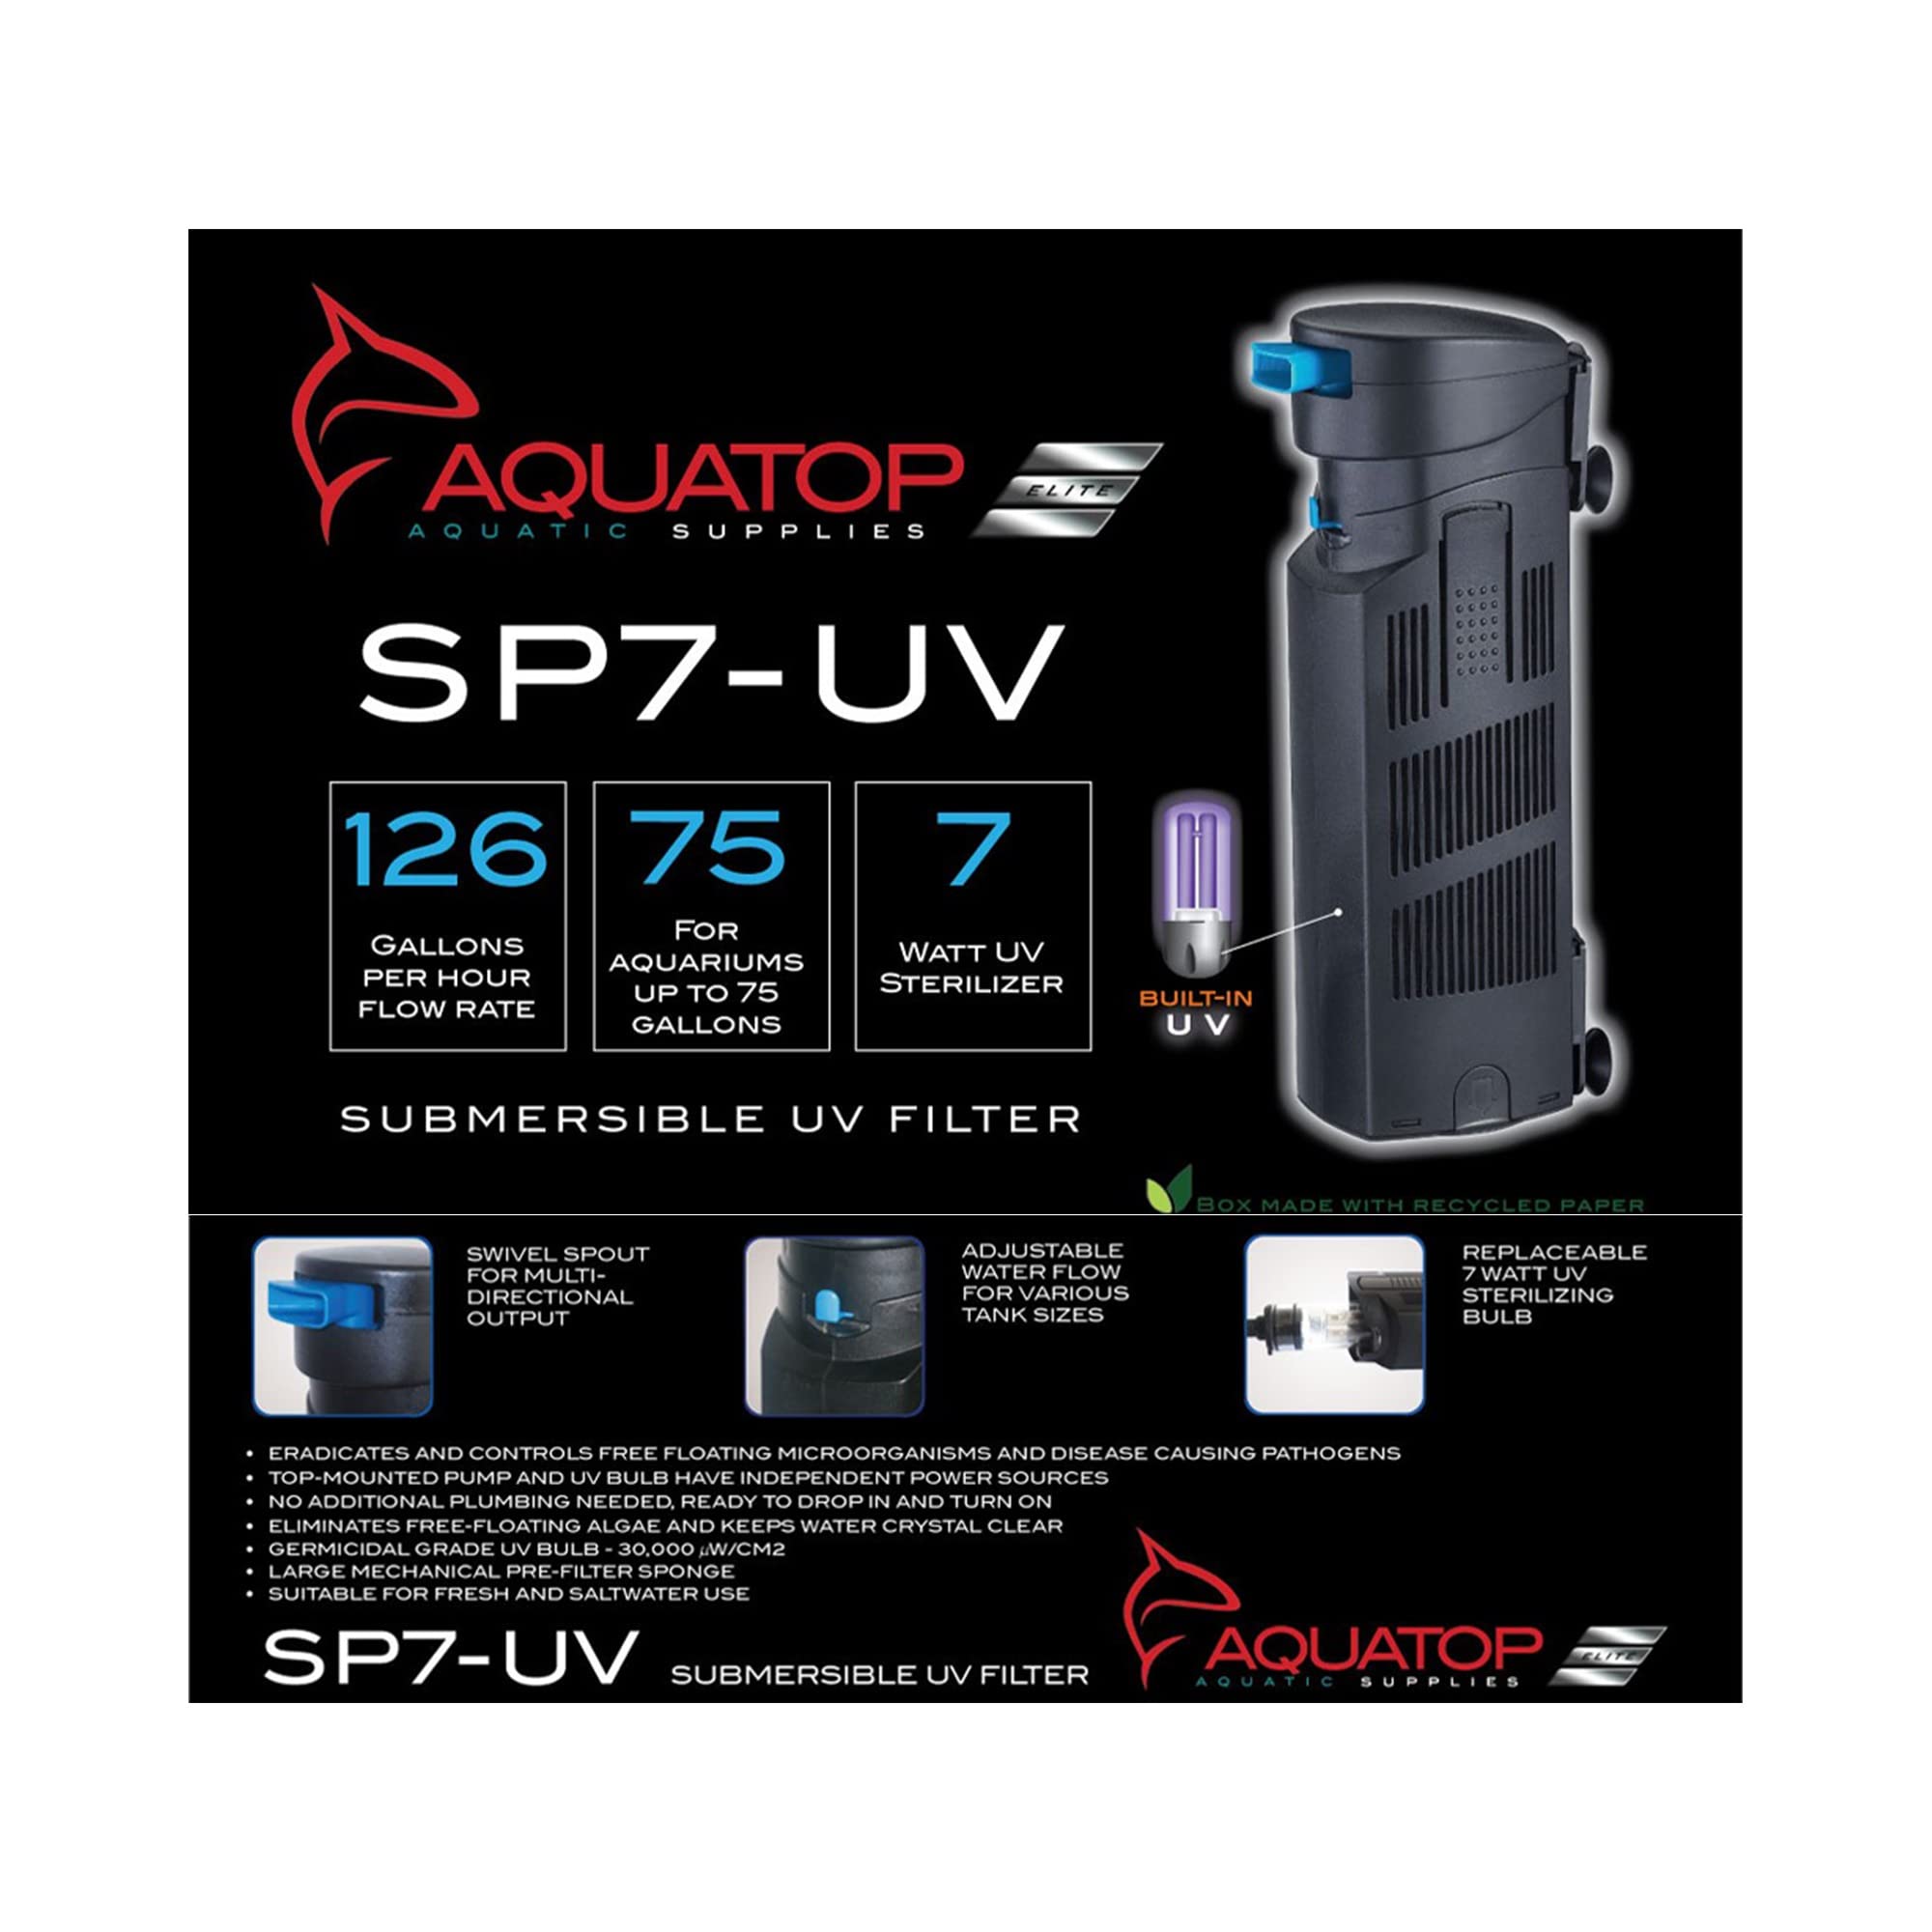 Aquatop 72-126 GPH Internal Filter with 7W UV Light - For Up To 75 Gallon Fish Tanks, UV For Crystal Clear Water, Fresh & Saltwater Use, Aquarium Filters For Fish & Turtle Tanks, SP7-UV